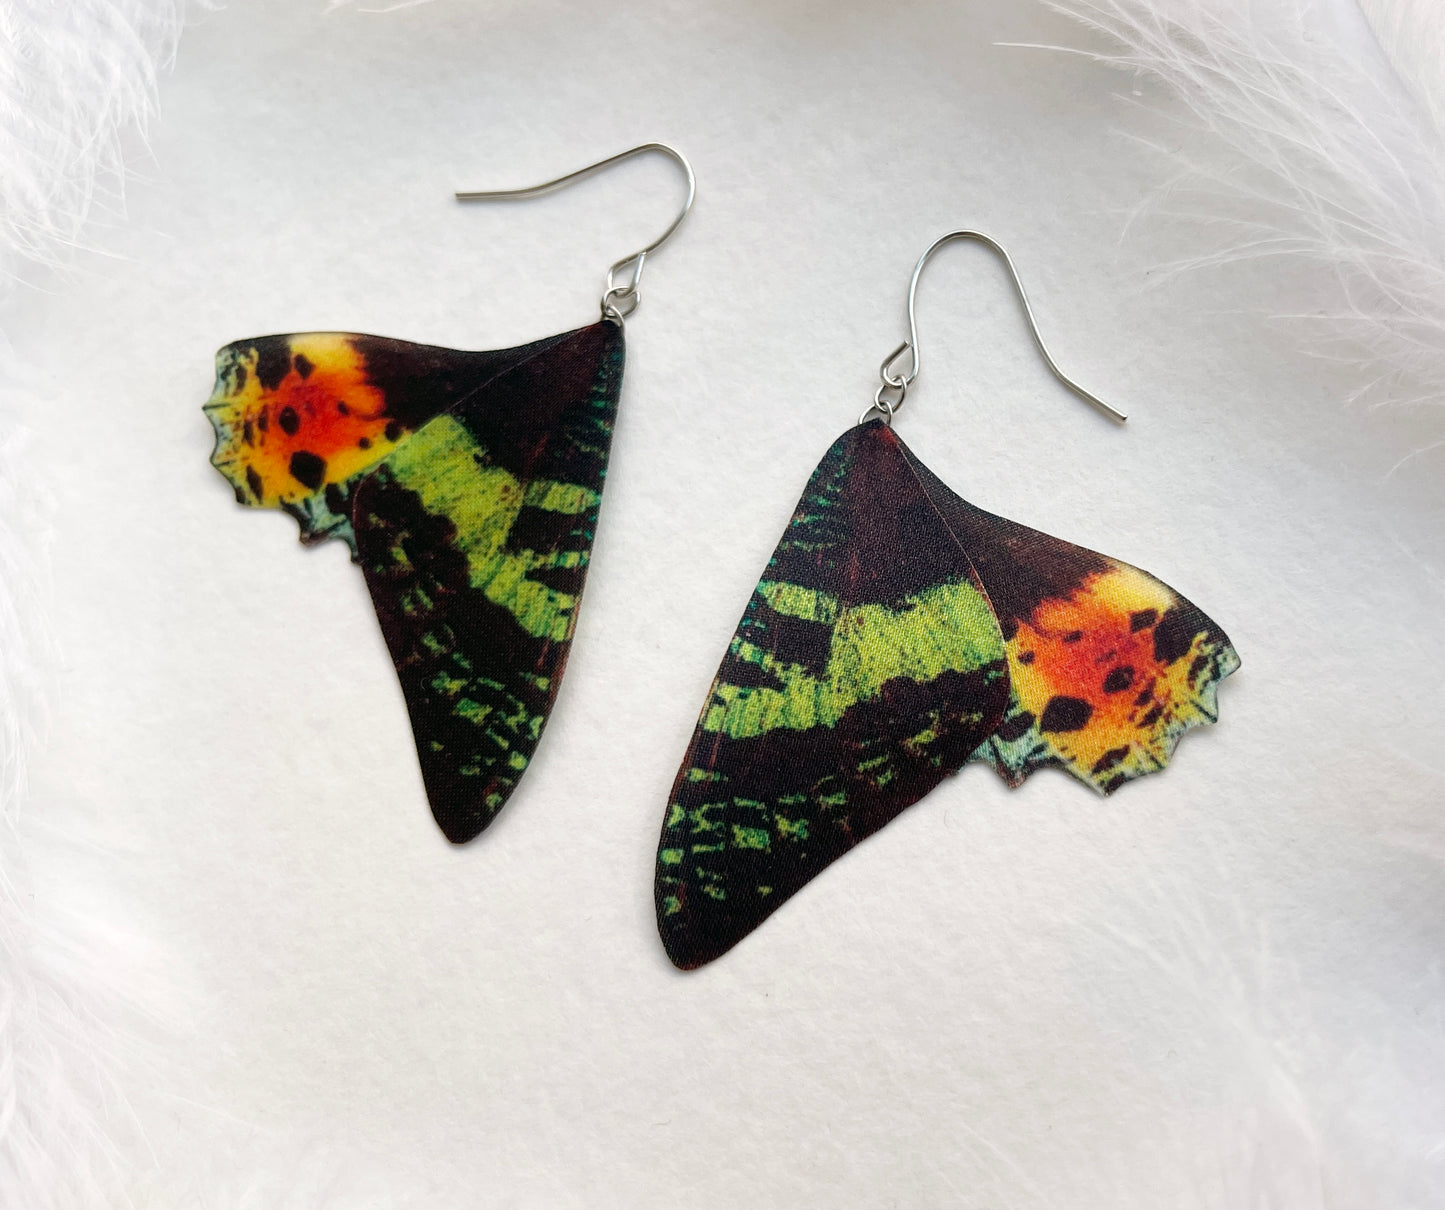 Whimsigoth-style moth wing earrings with Urania Sunset Moth design